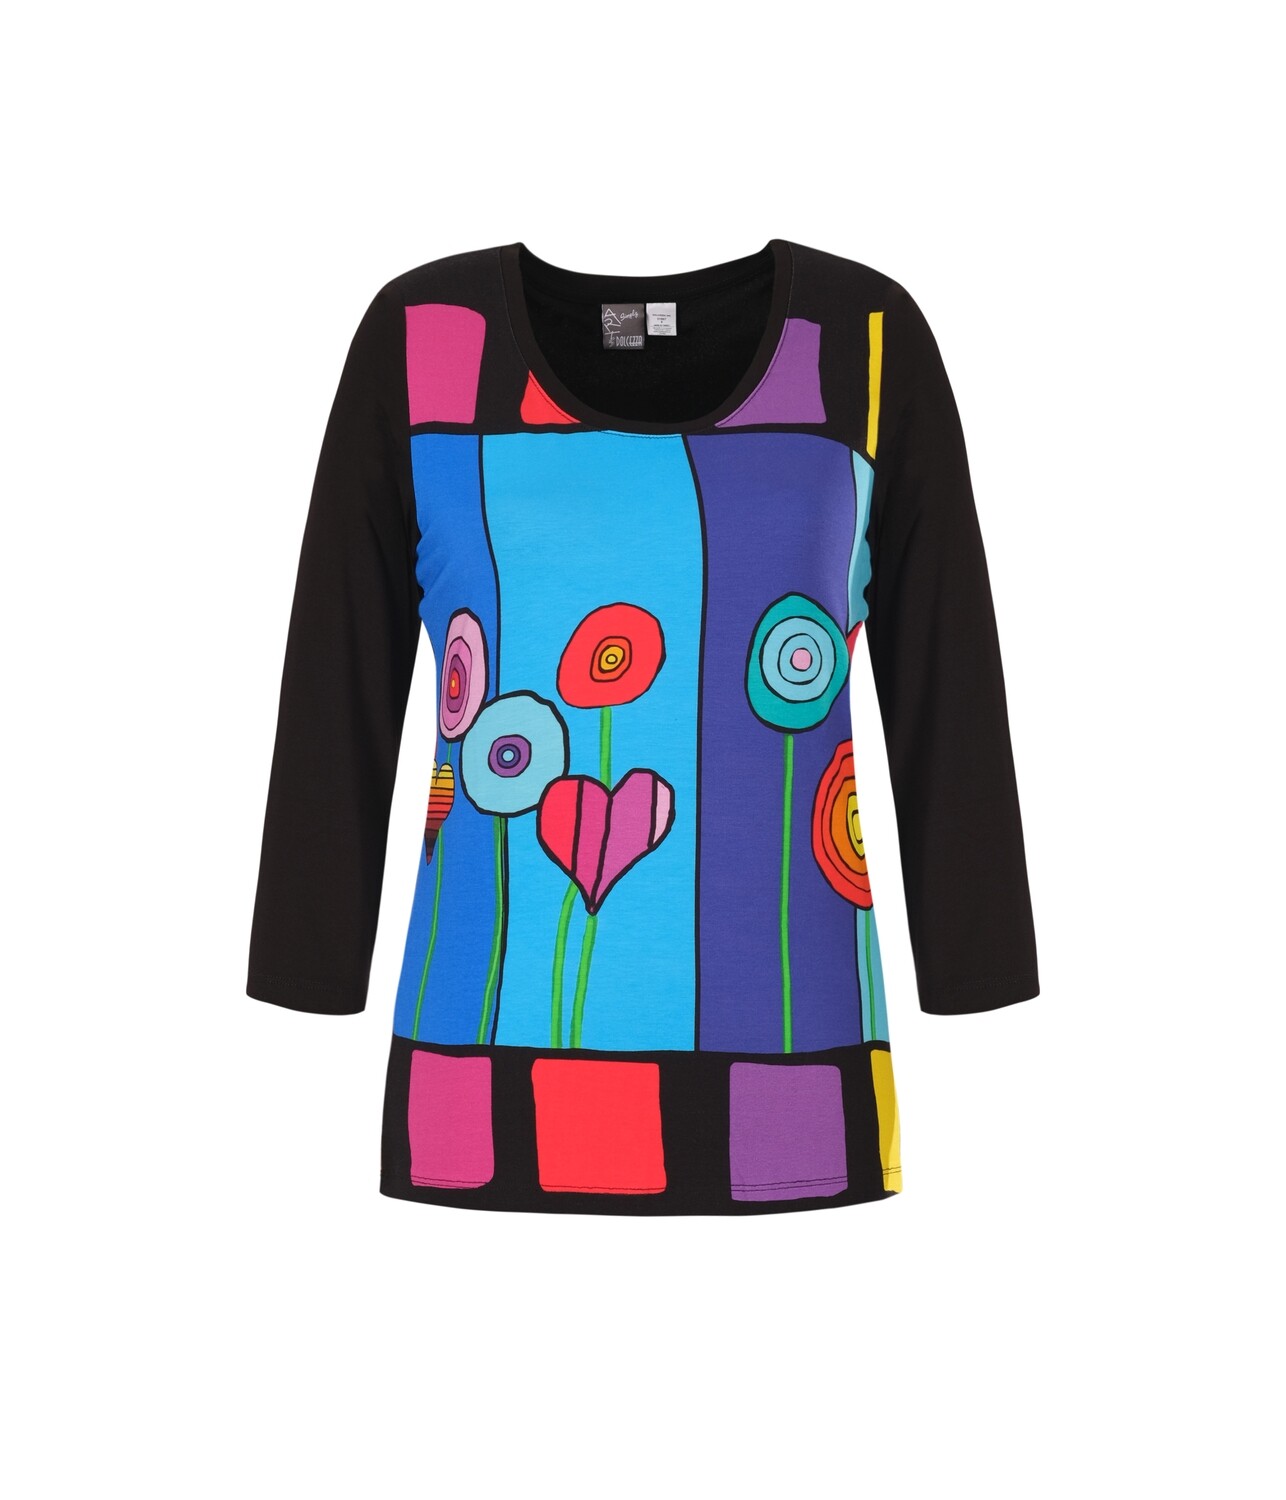 Simply Art Dolcezza: Lollipops Of Happiness Abstract Art T-shirt